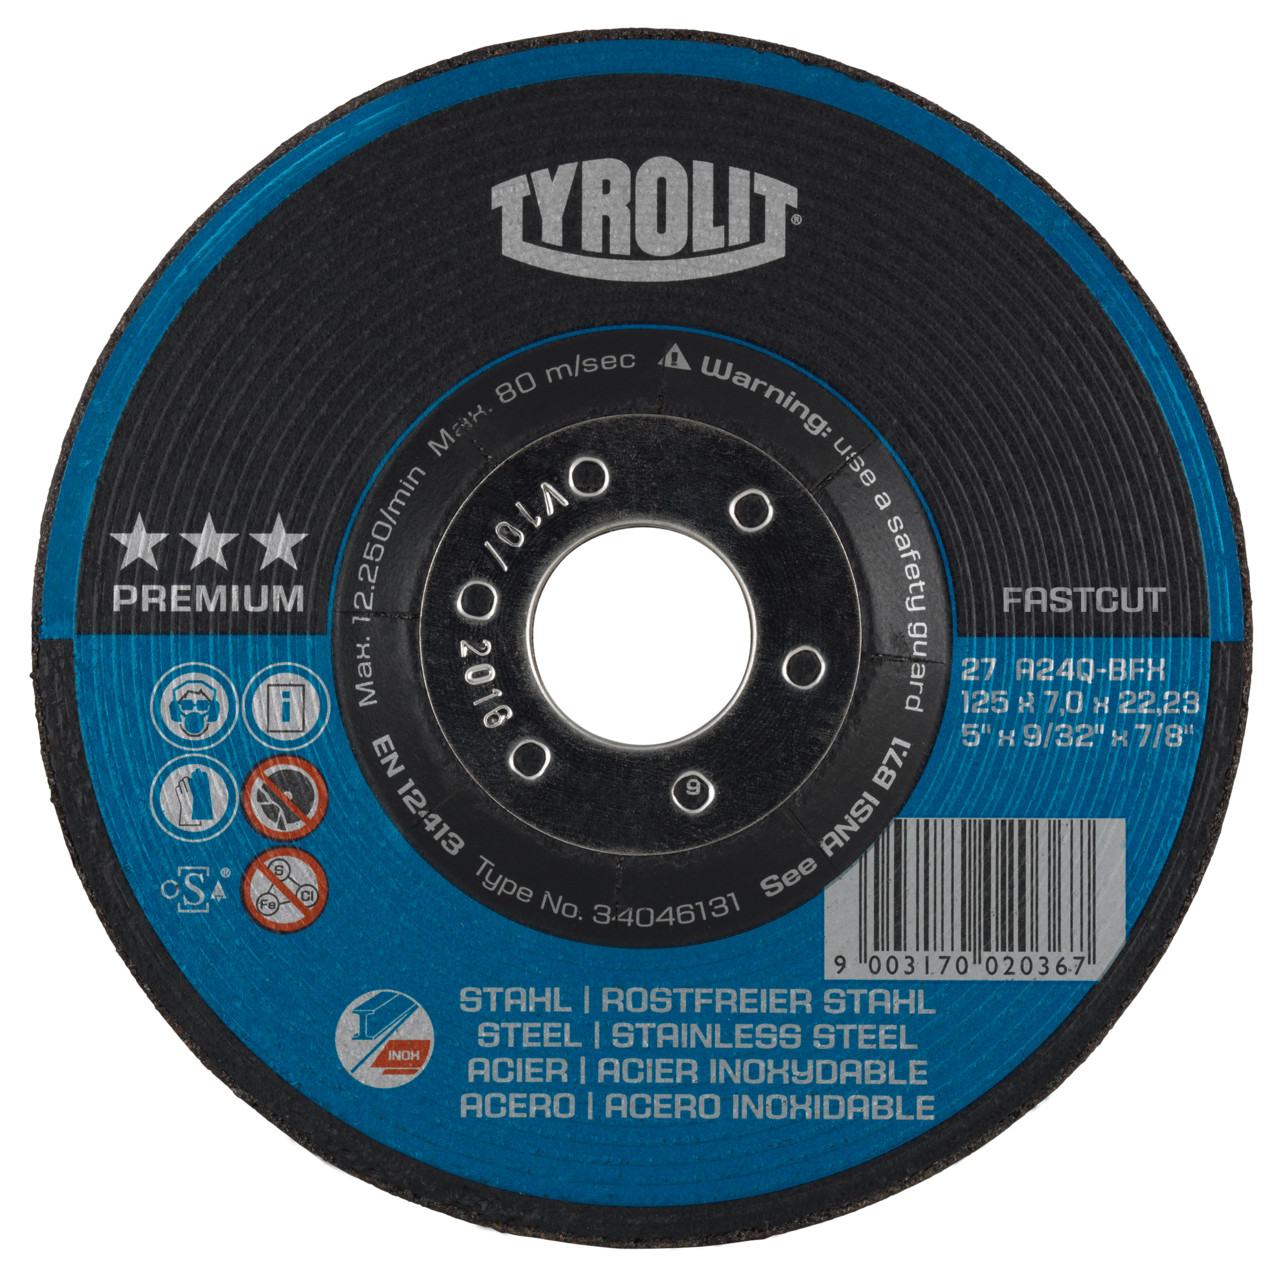 Tyrolit Roughing disc DxUxH 150x7x22.23 FASTCUT for steel and stainless steel, shape: 27 - offset version, Art. 5330